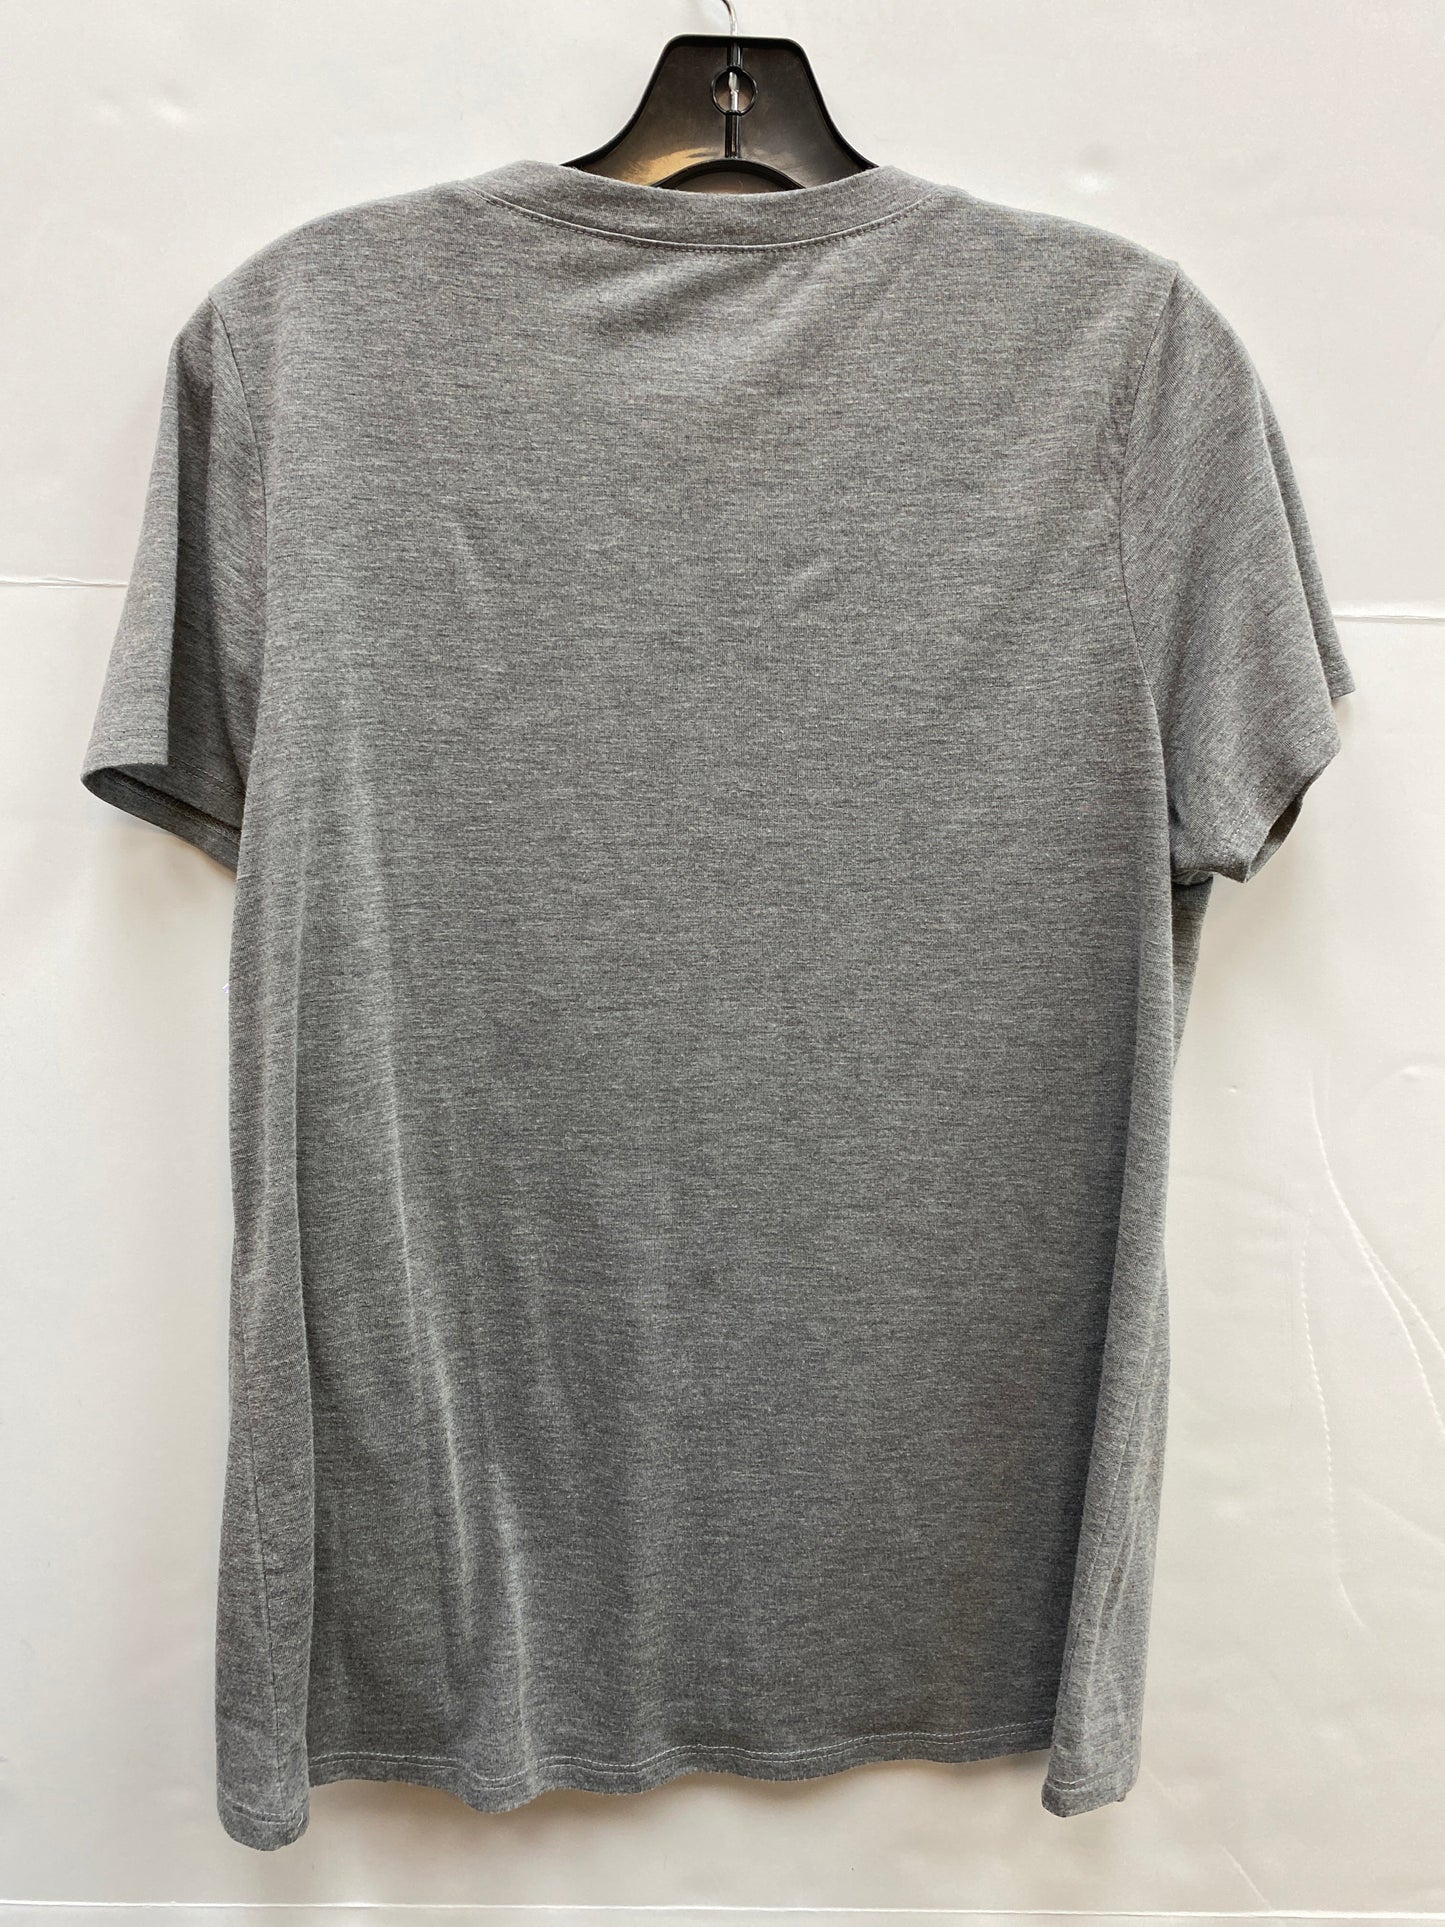 Top Short Sleeve By Clothes Mentor  Size: Xl